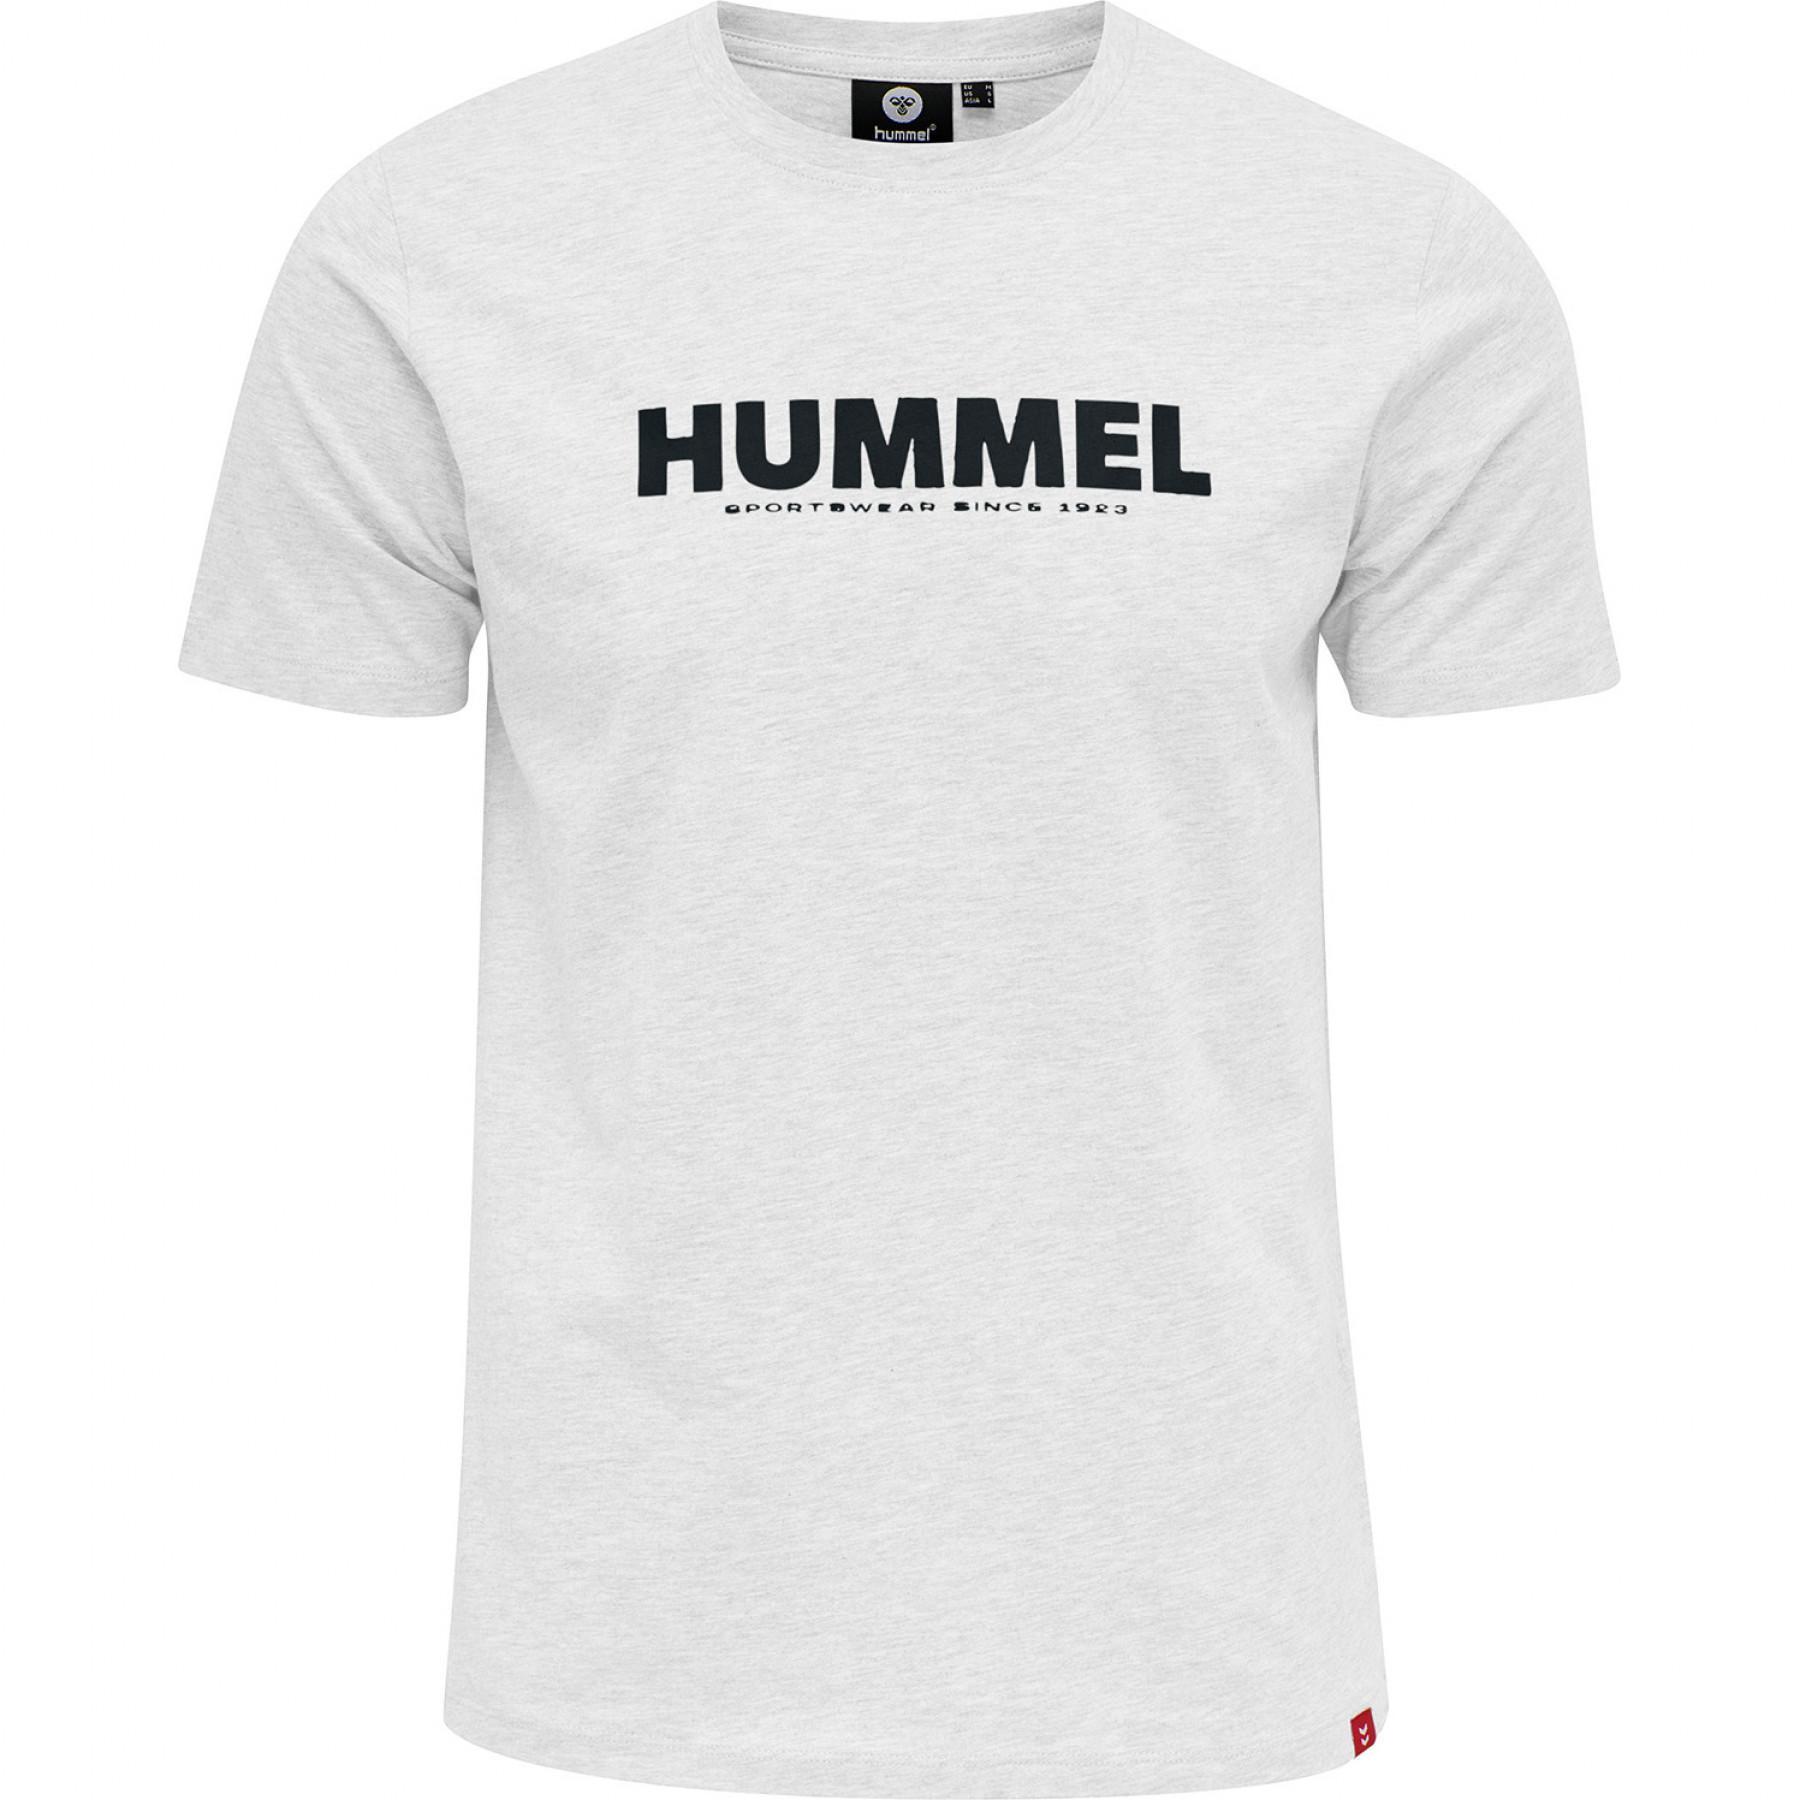 - polos tennis Textile Hummel T-shirt hmllegacy - and Table - T-shirts